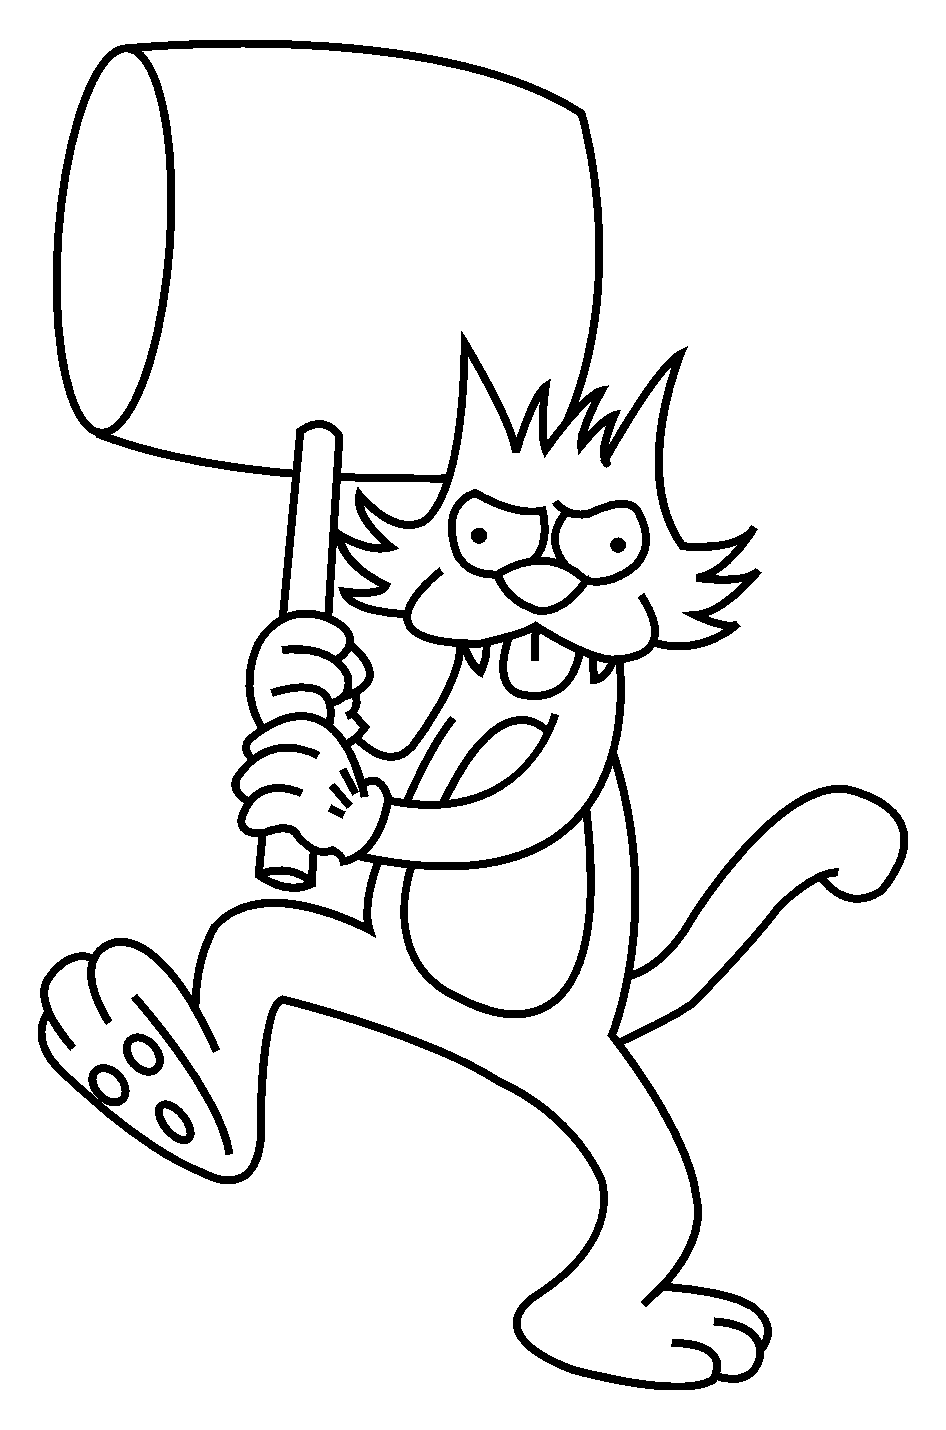 Incredible Simpsons coloring pages, simple, for kids